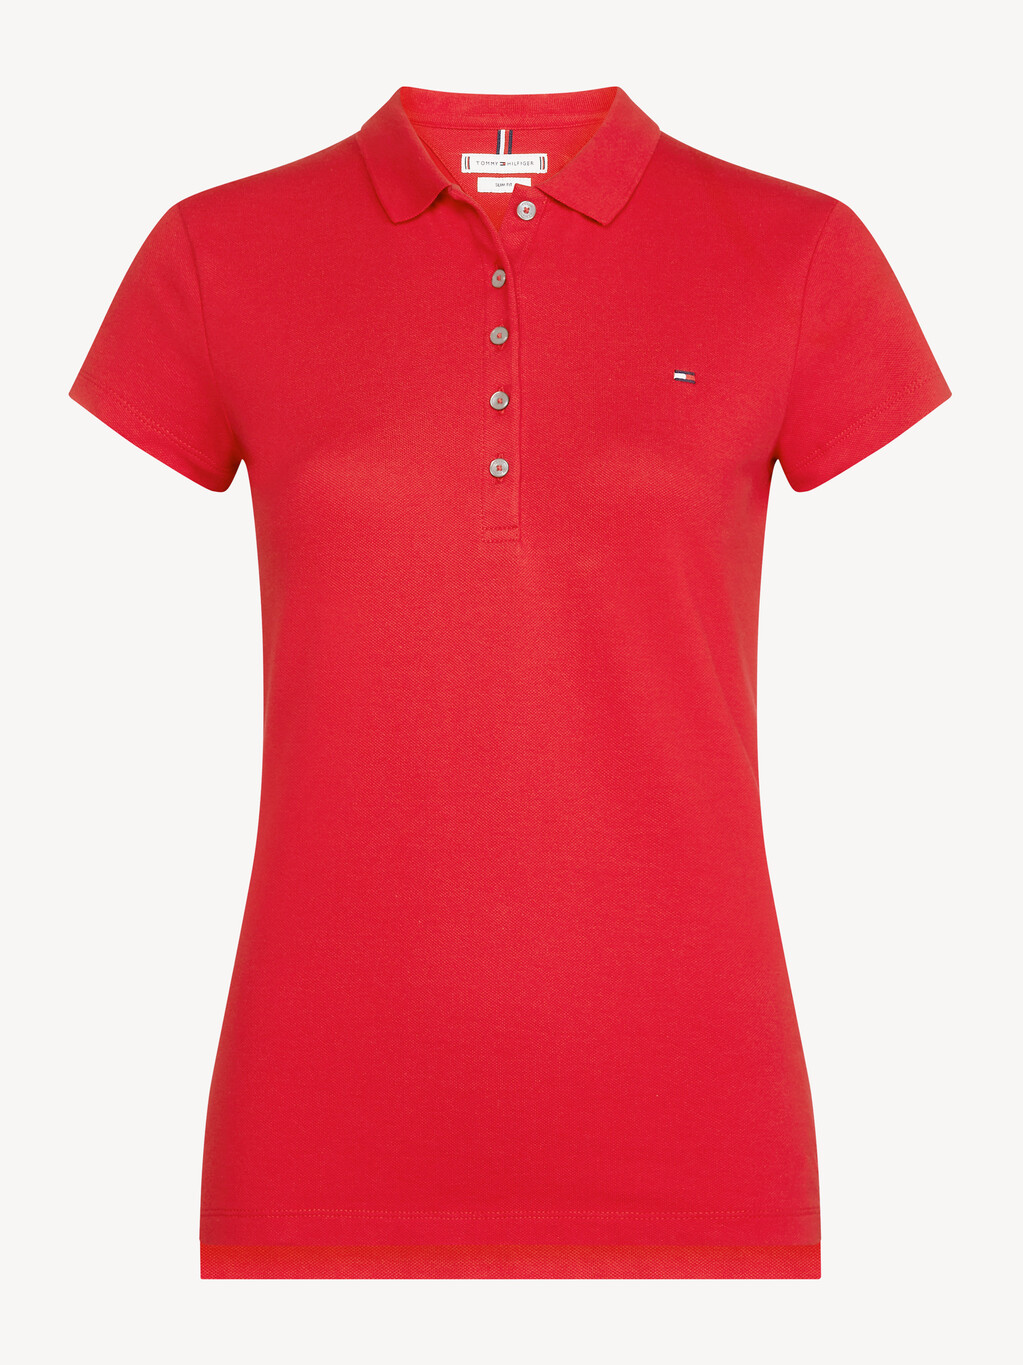 Heritage Slim Fit Polo Shirt, APPLE RED, hi-res